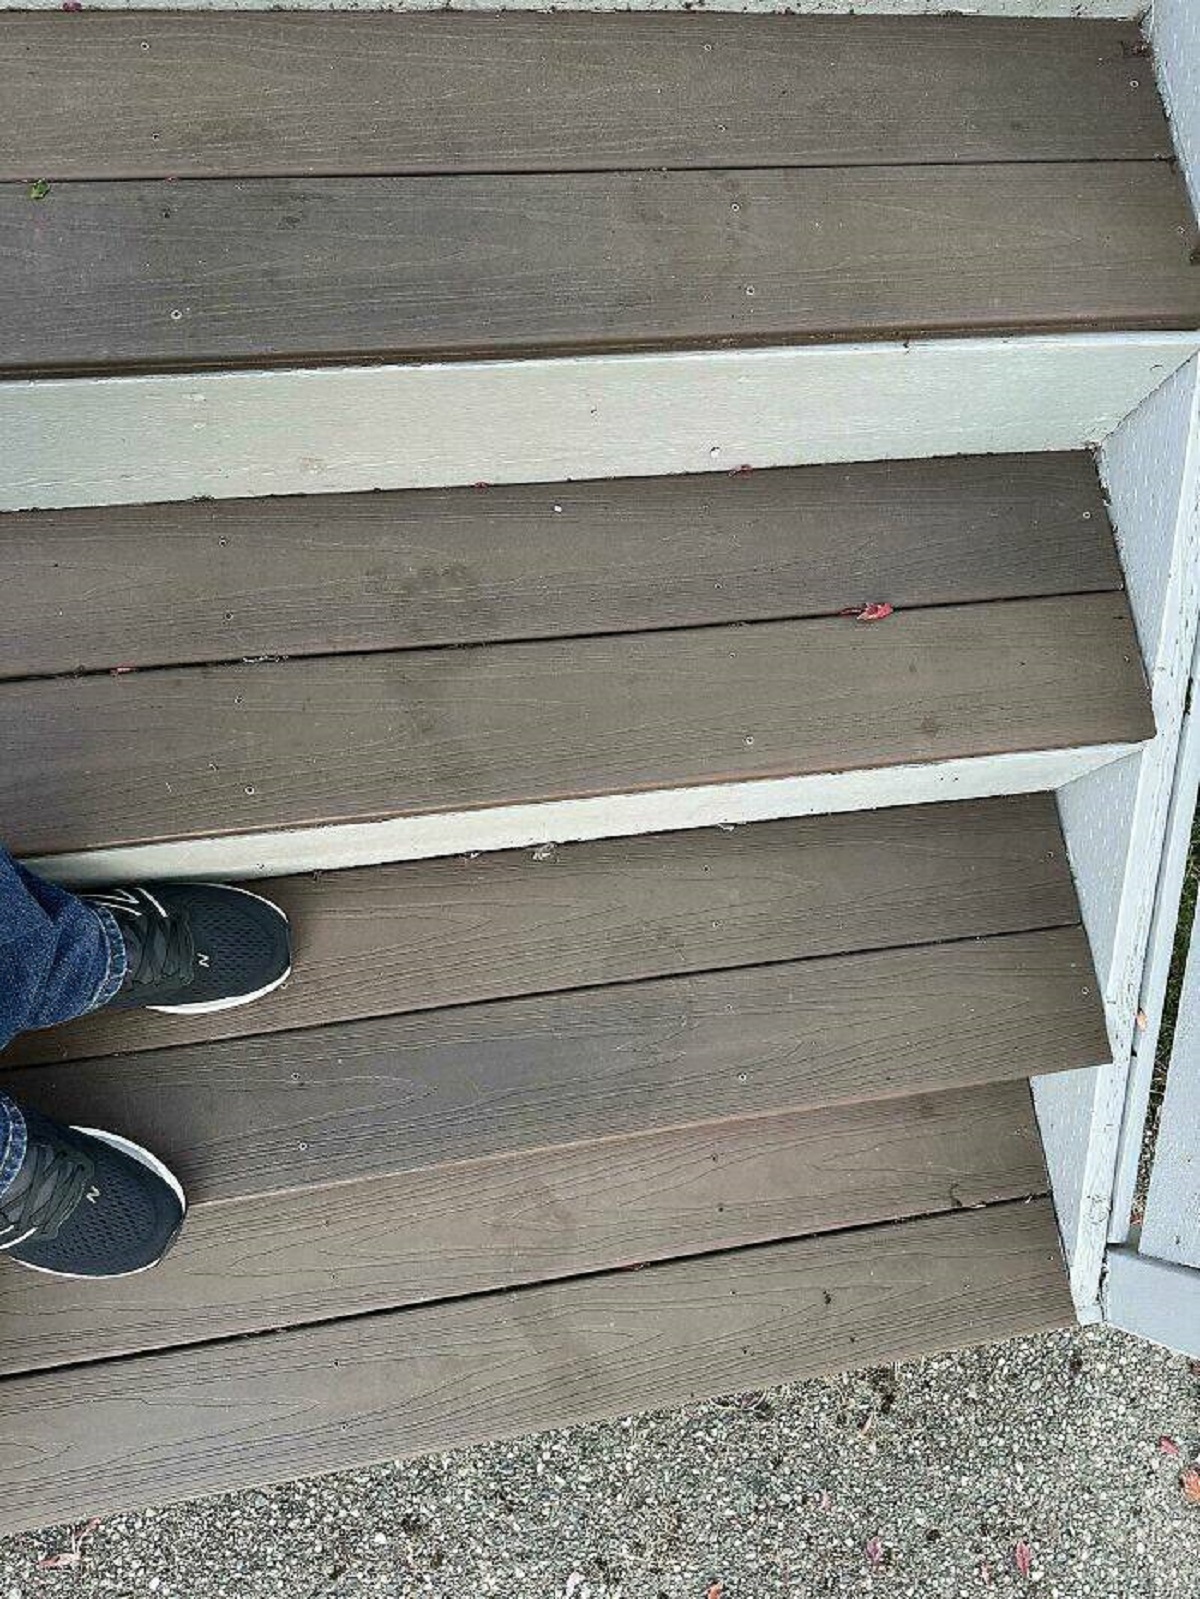 "Was Leaving My House At 6am And Found This In The Dew On The Front Steps"